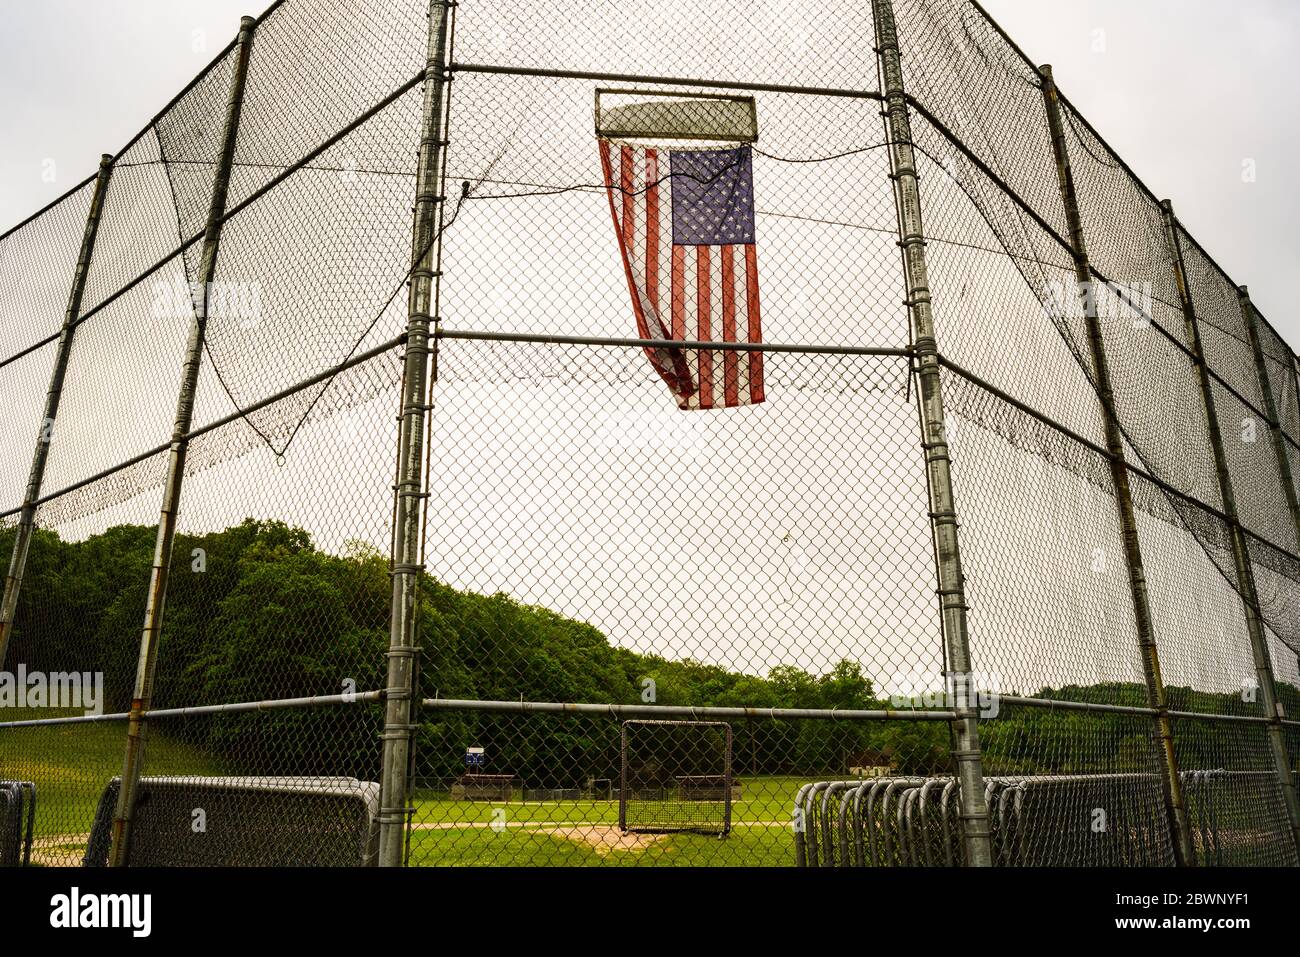 American flag flies on a baseball field, the David L. Feldman Memorial Field, which was empty due to the continued need for social distancing as a result of the Covid-19 pandemic resulting from the coronavirus. Stock Photo